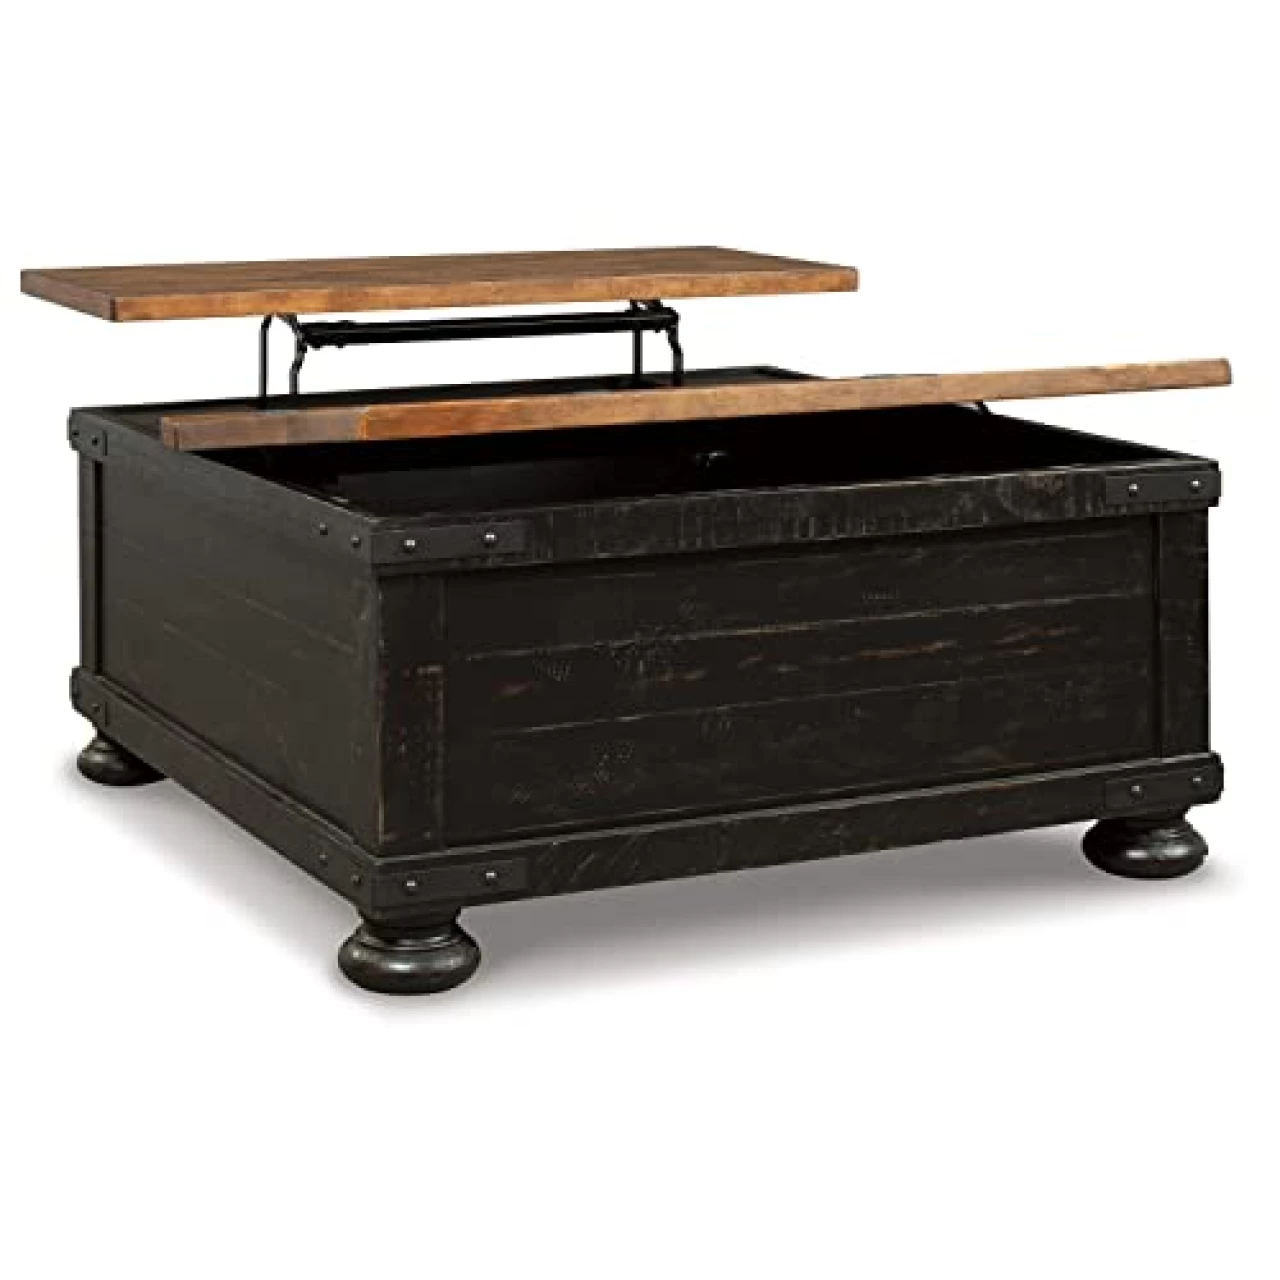 Signature Design by Ashley Valebeck Farmhouse Lift Top Coffee Table with Storage, Distressed Brown &amp; Black Finish, 36 in x 36 in x 18 in